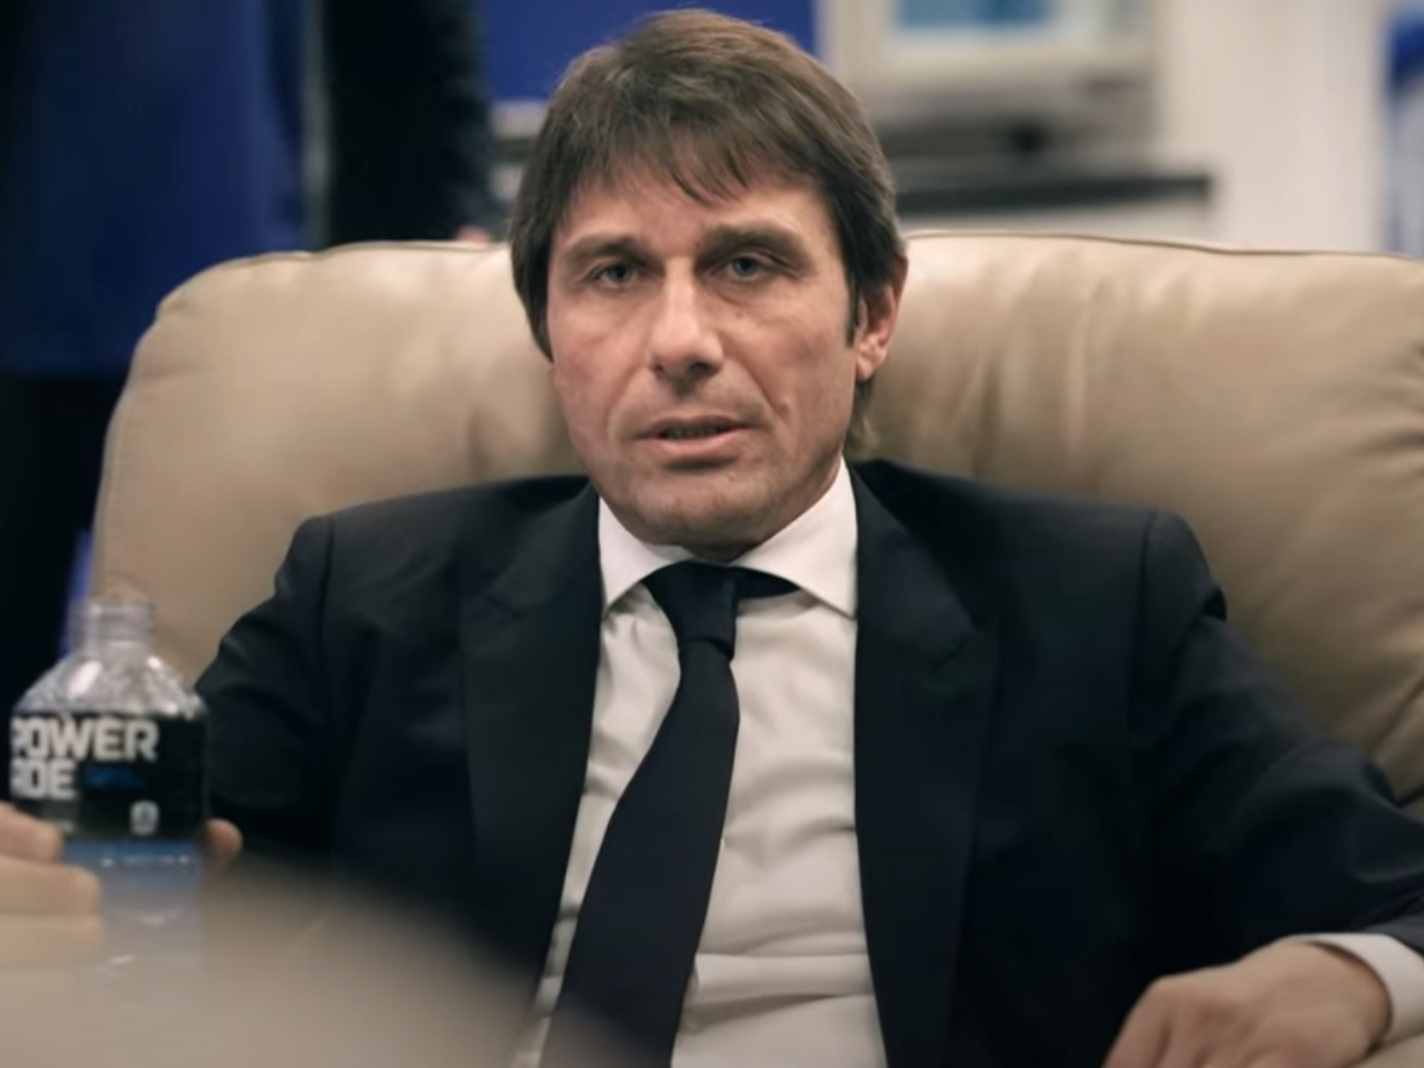 Tottenham manager Antonio Conte steals the show in a new ad for Powerade